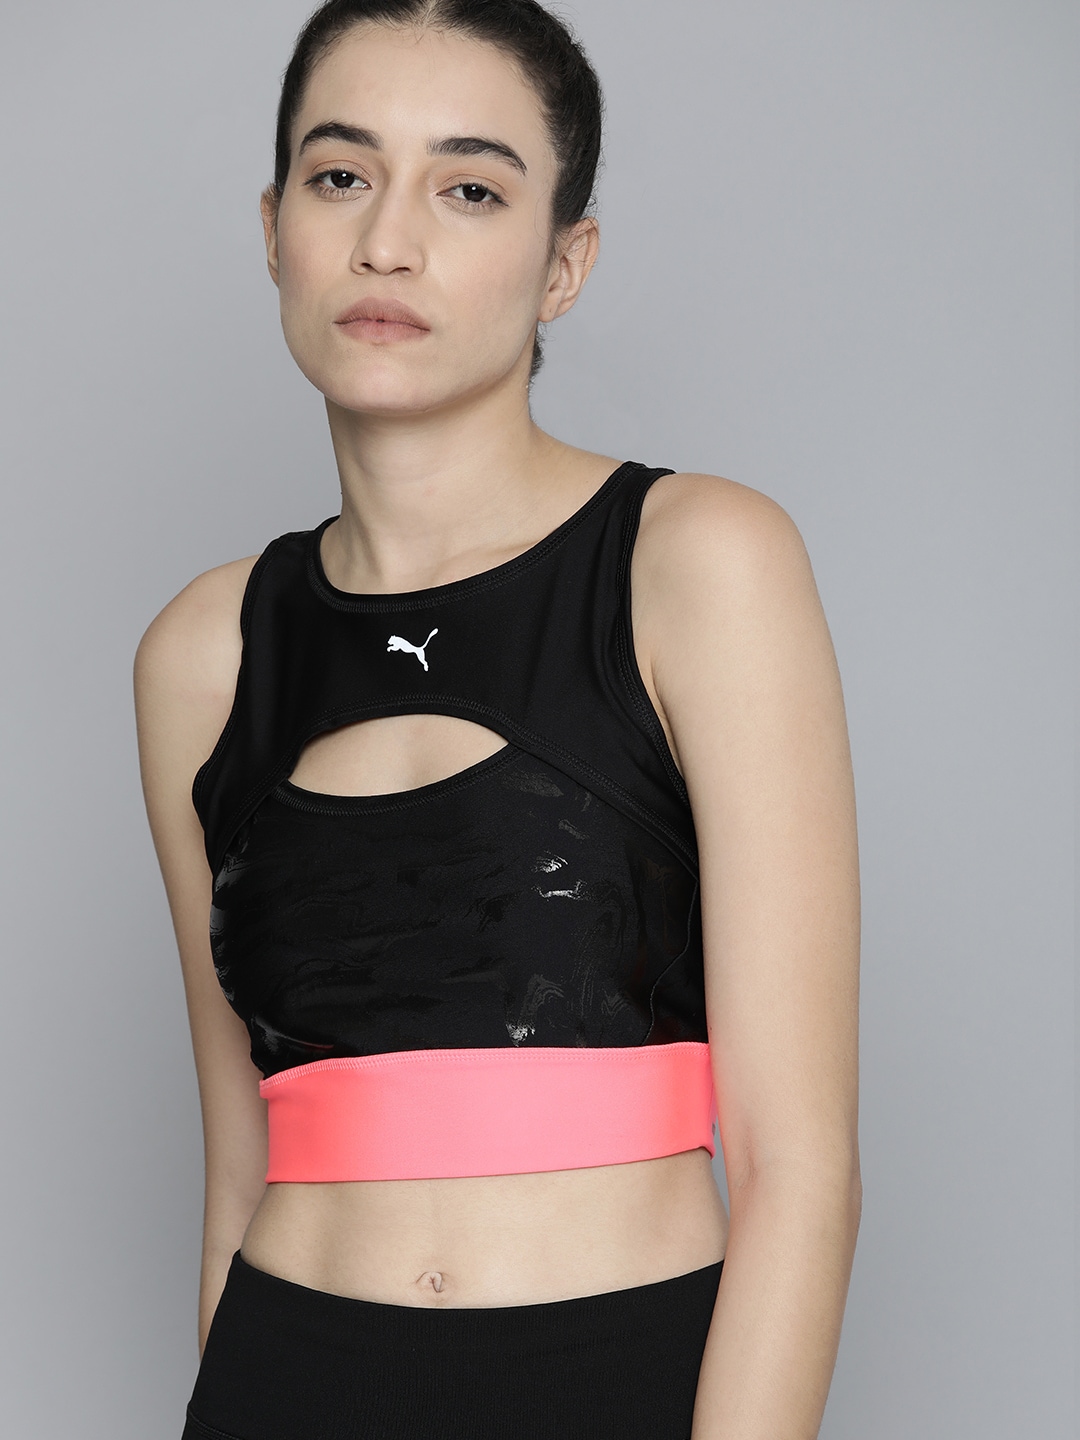 Puma Women Black Abstract Print Cut-Out Racerback Ultraform AOP Crop Running Tank Top Price in India